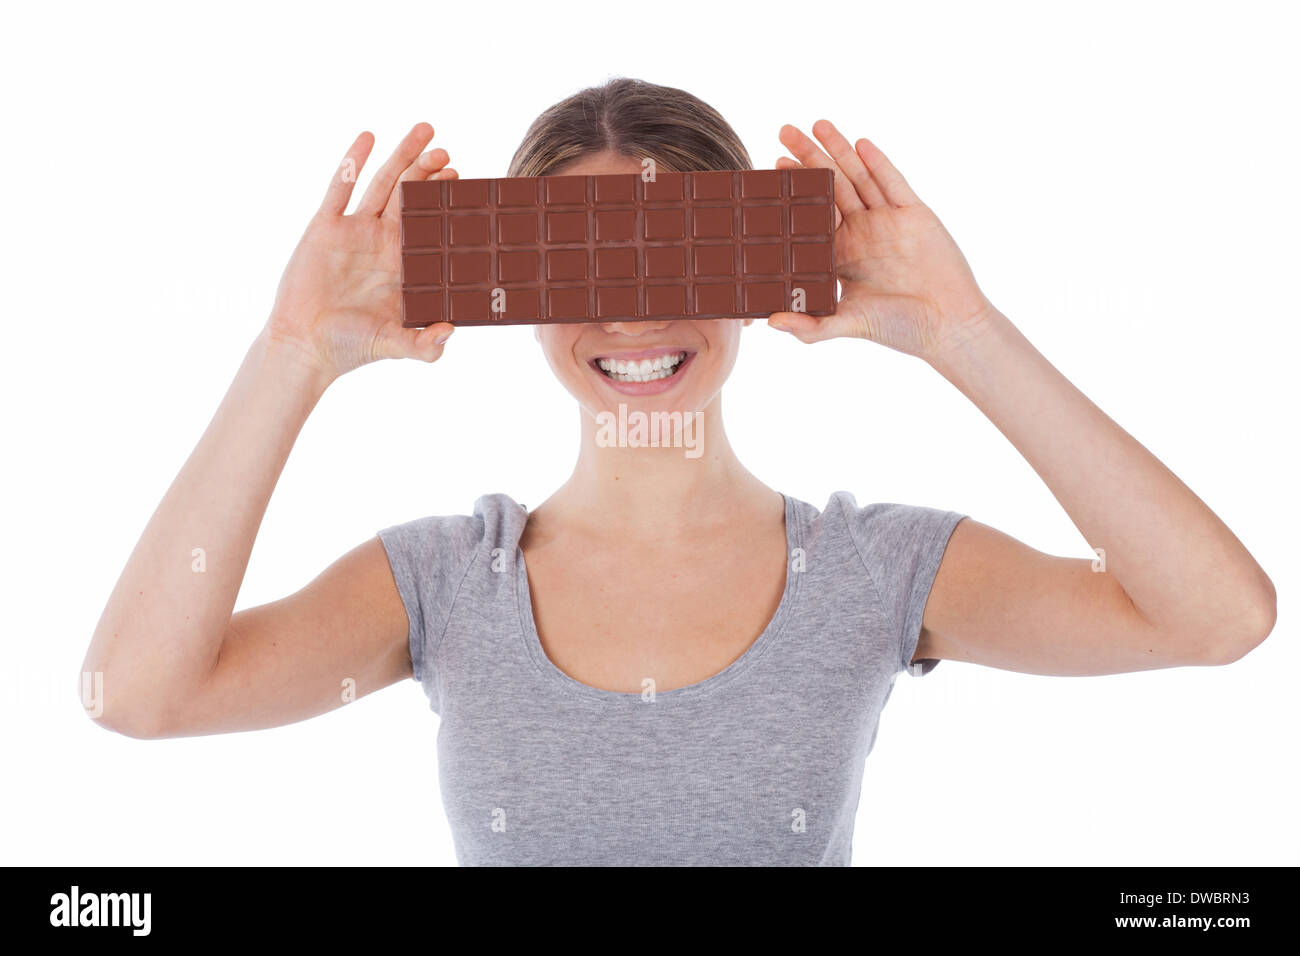 Portrait of a smiling woman holding a chocolate tablet, isolated on white Stock Photo